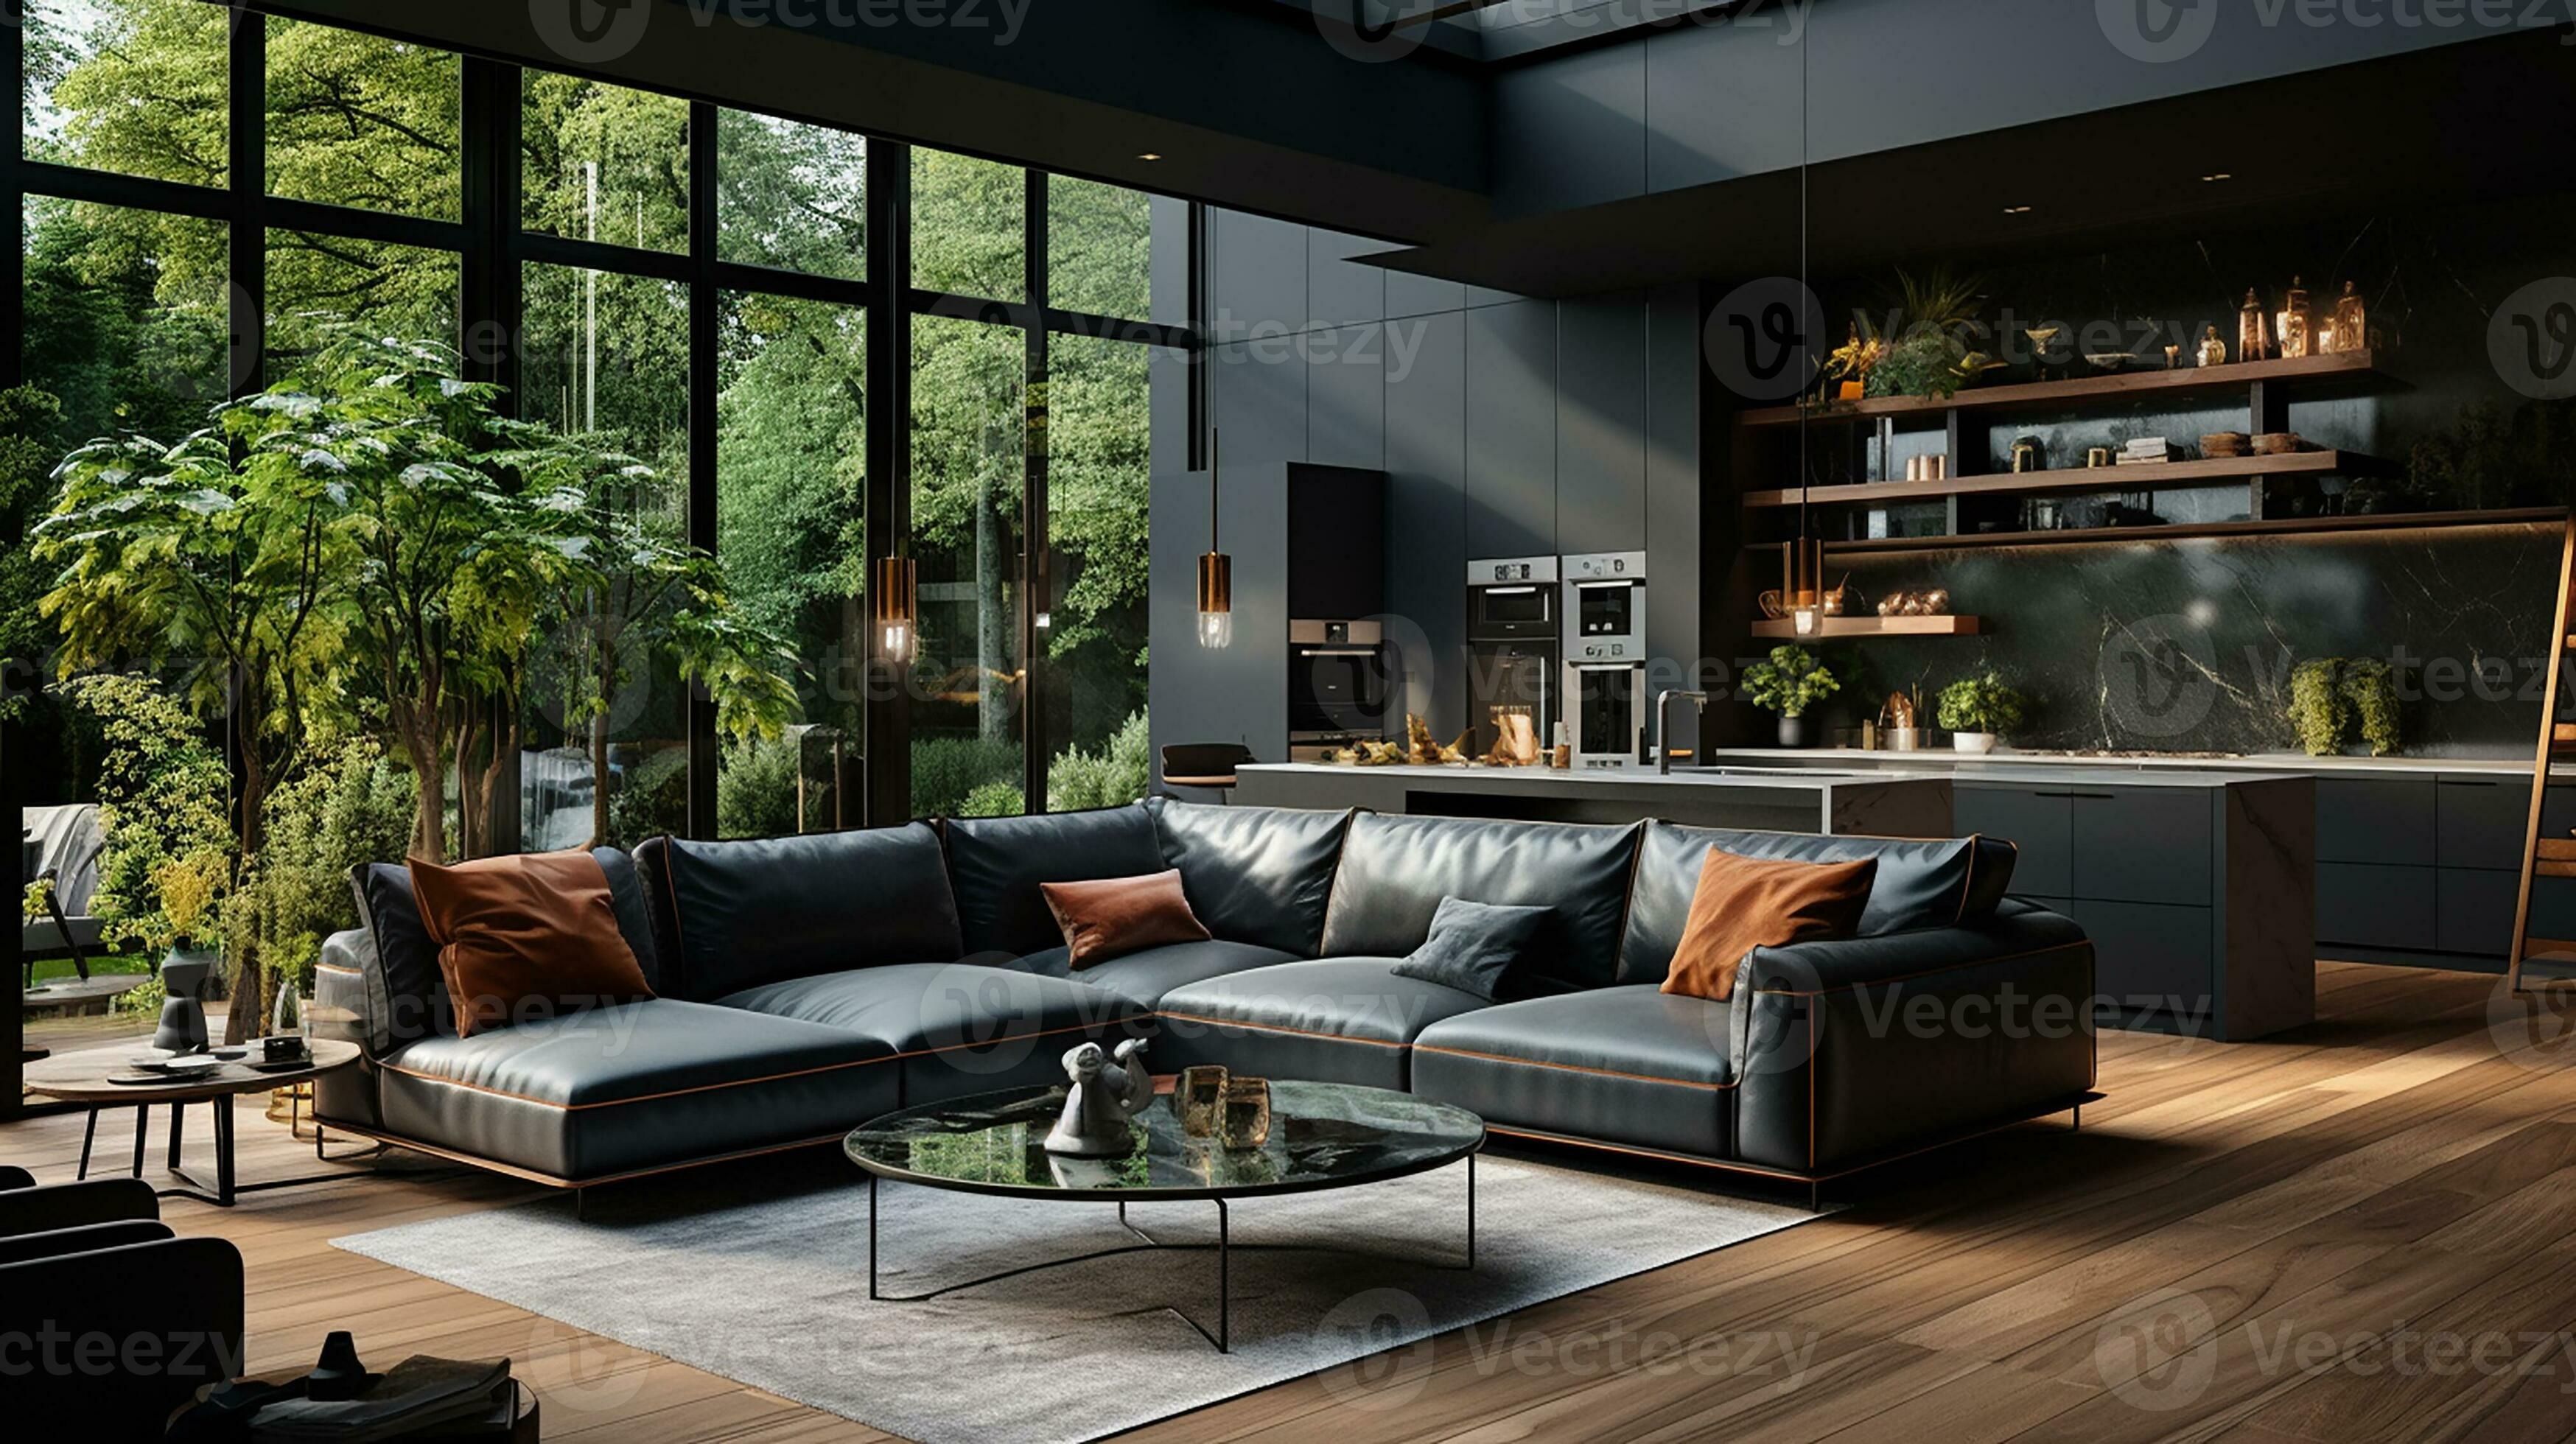 https://static.vecteezy.com/system/resources/previews/028/297/716/large_2x/modern-interior-design-kitchen-and-bright-spacious-room-with-a-comfortable-sofa-plants-and-elegant-accessories-black-walls-parquet-floor-generative-ai-photo.jpg